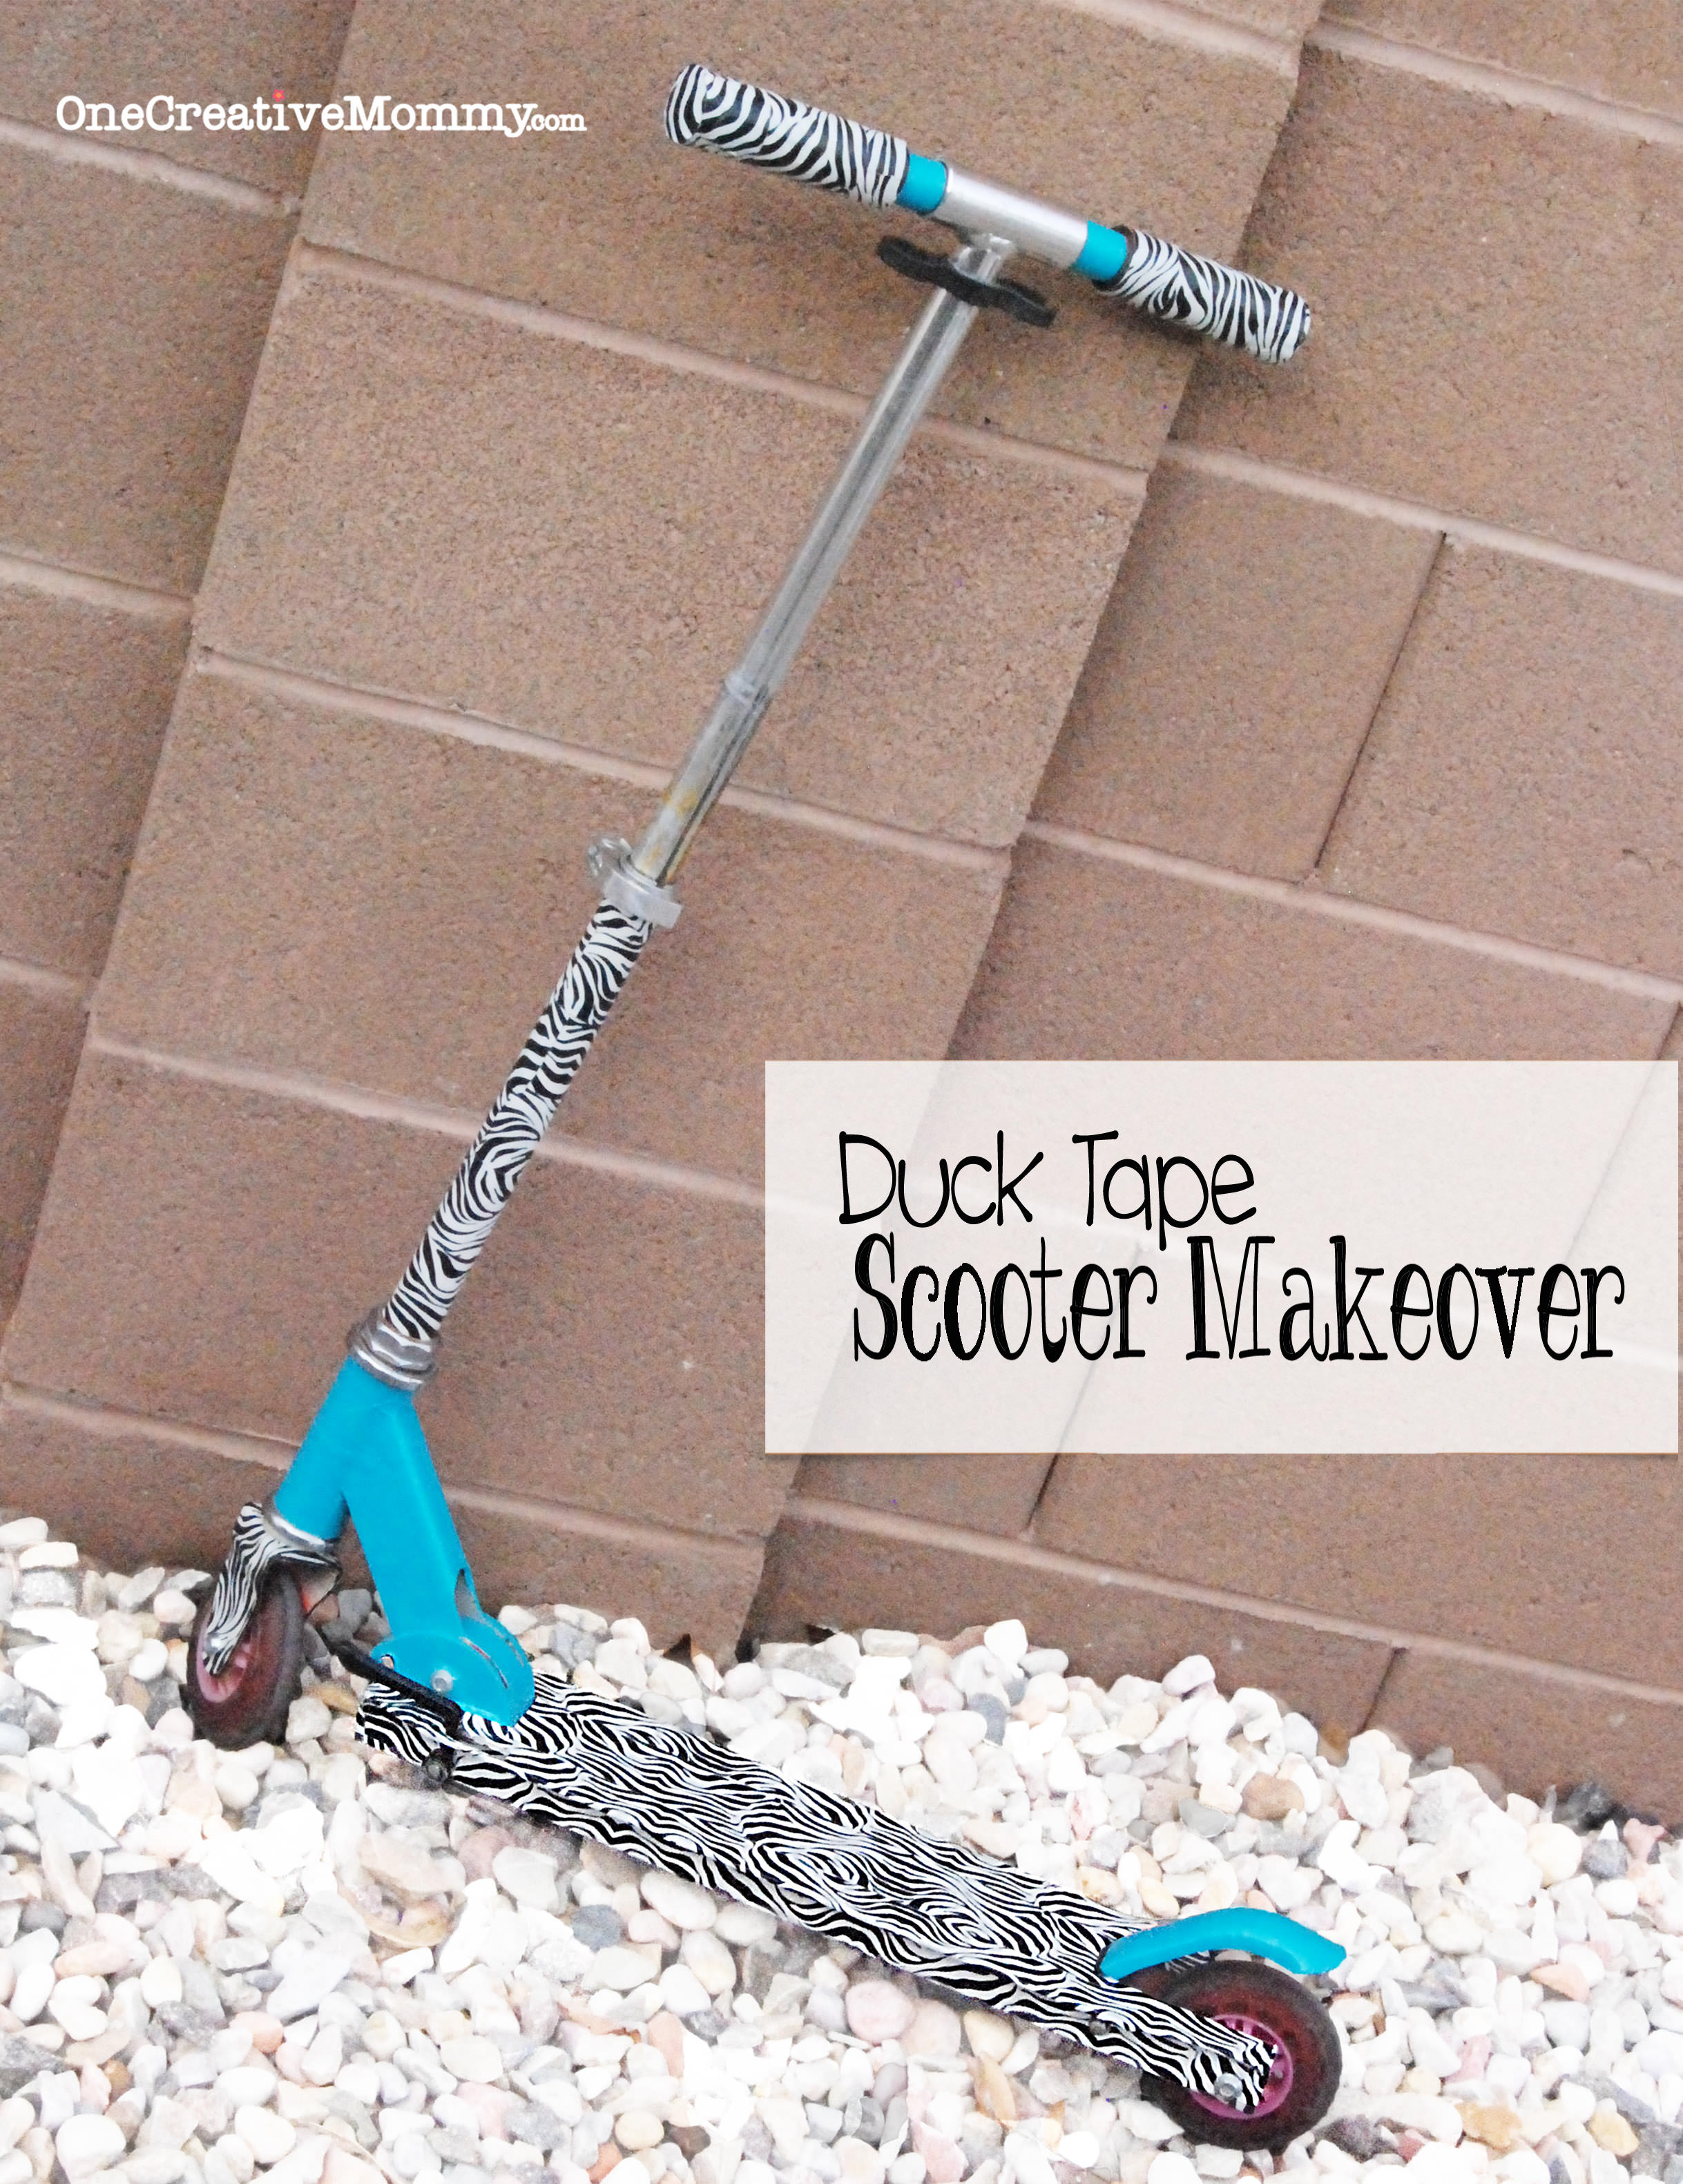 Duck Tape Scooter Makeover from OneCreativeMommy.com {Don't throw away that faded scooter. Give it a fresh new look with duck tape! This scooter went from Barbie to all grown up!}